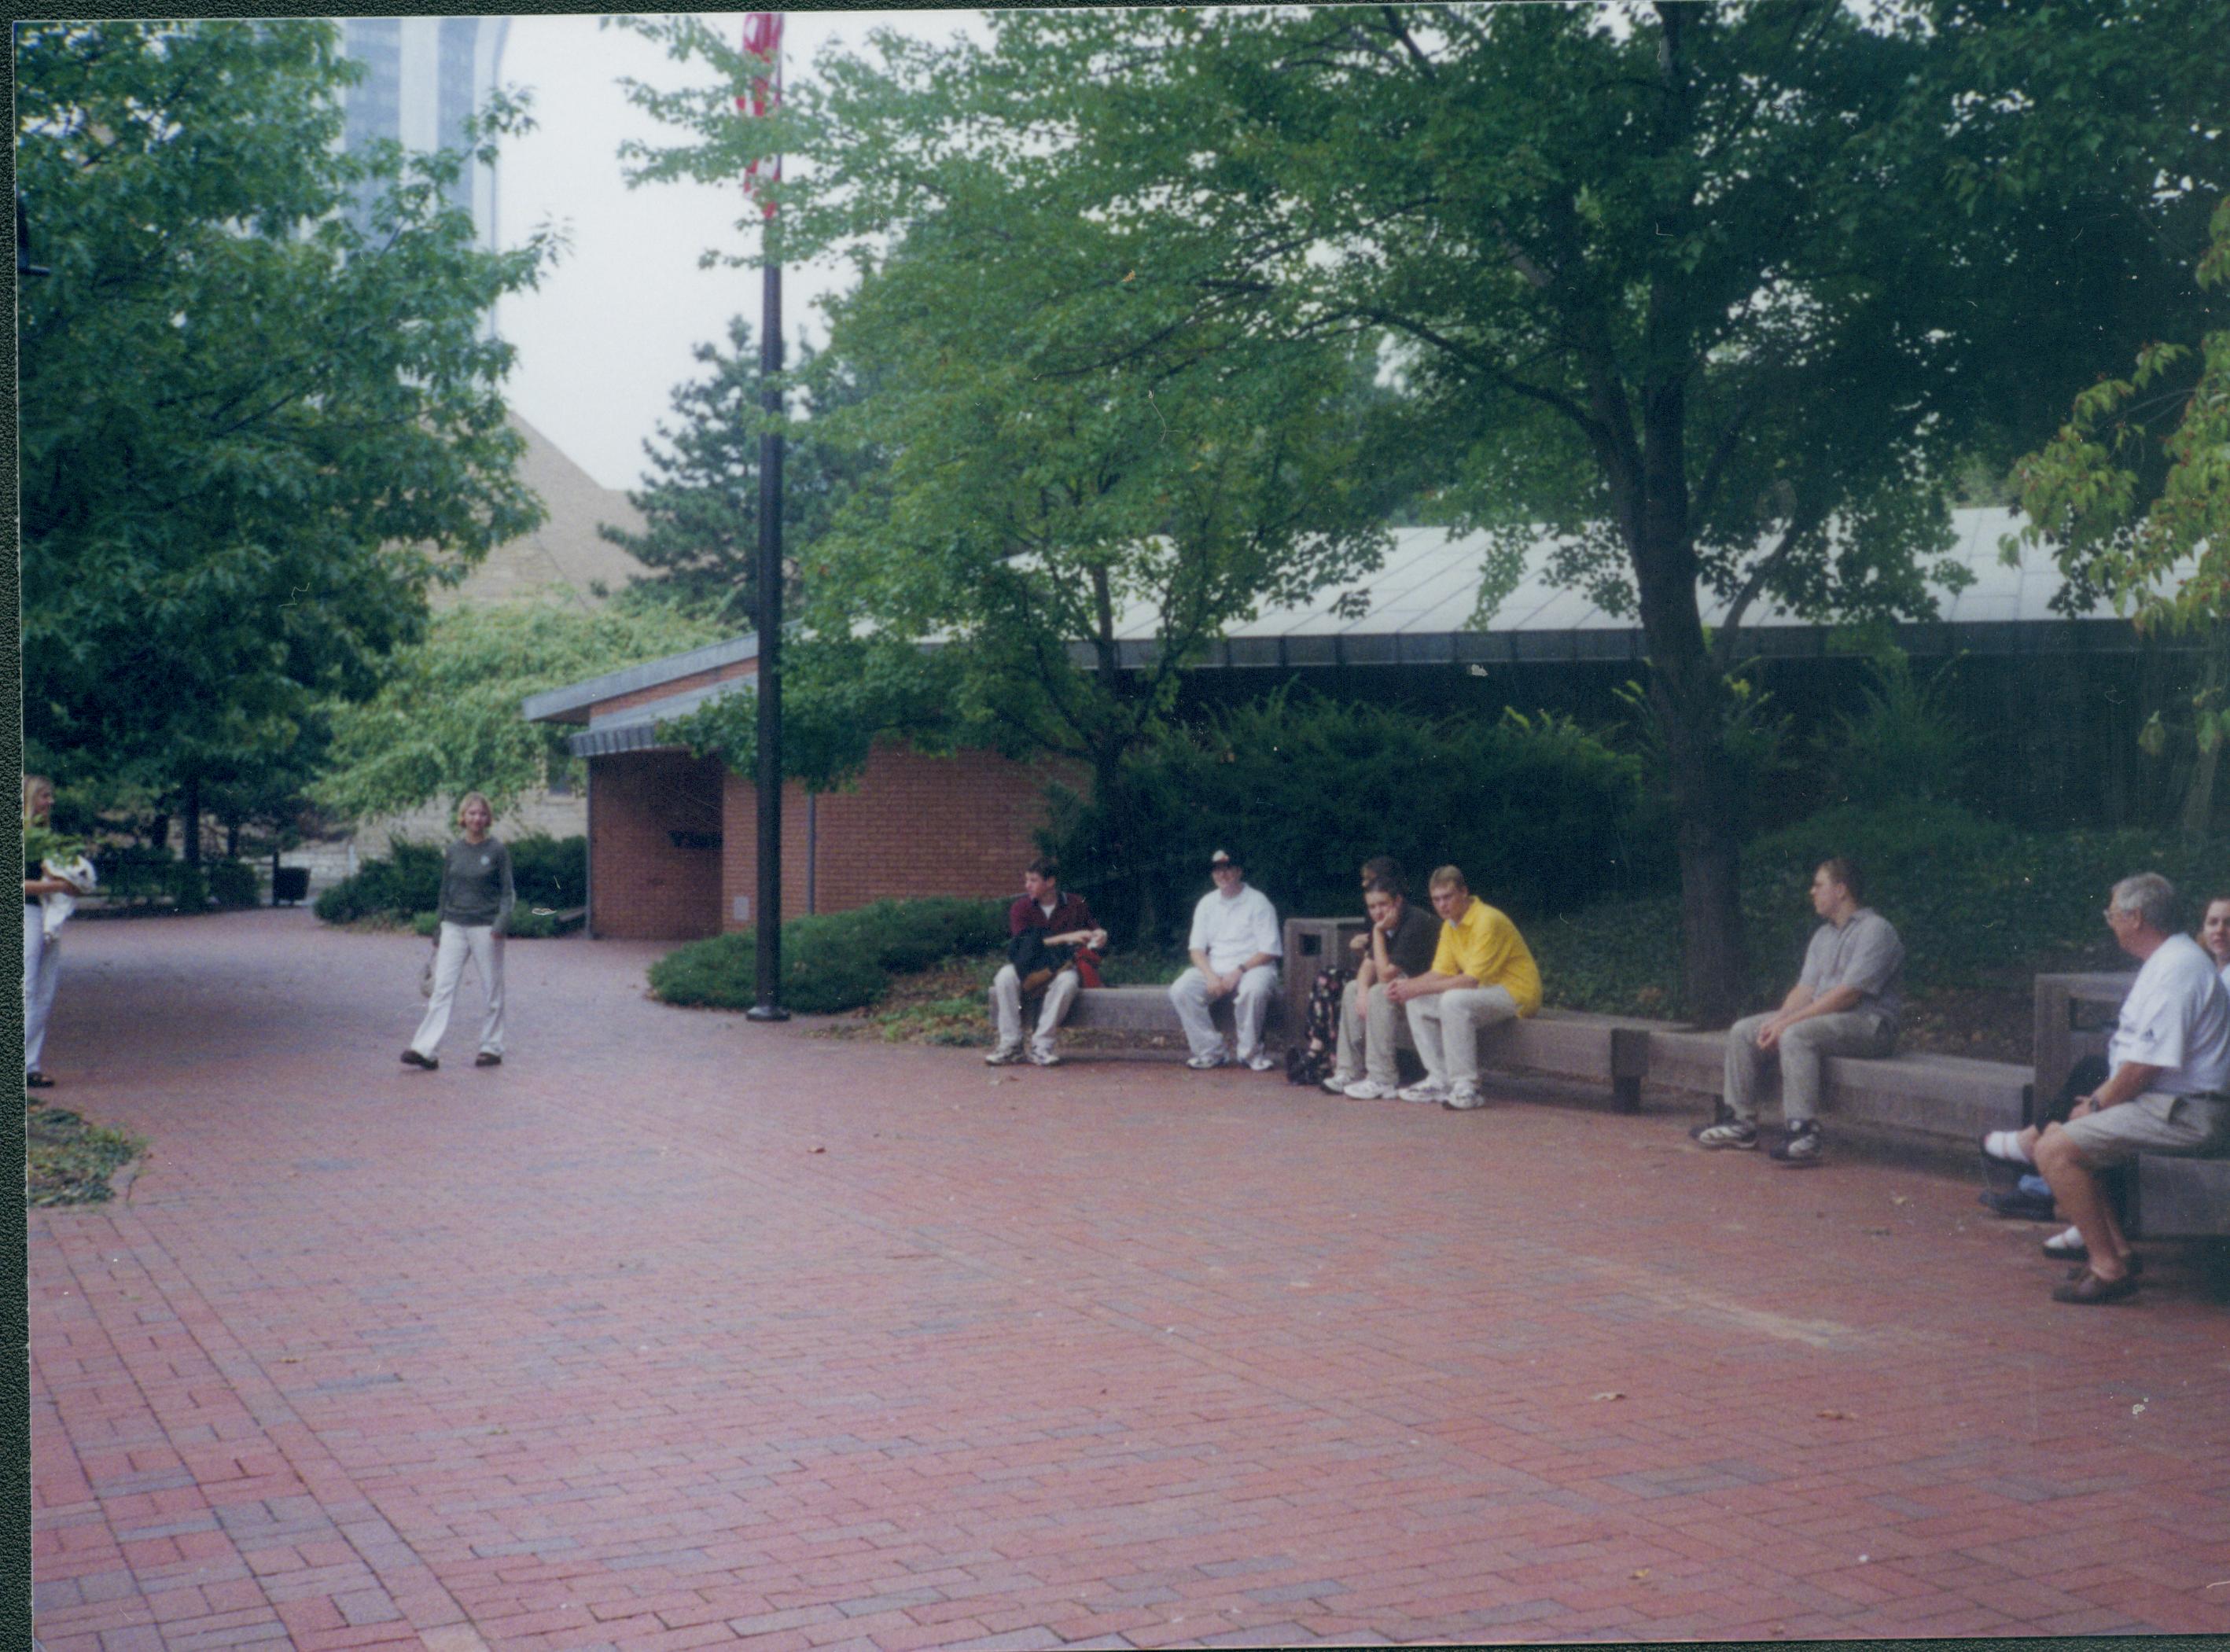 Students sitting on benches near corner of 7th and Jackson Streets Lincoln Home NHS- Visitor Center, Roll 15 exp 16, 15-16 Visitor Center, benches